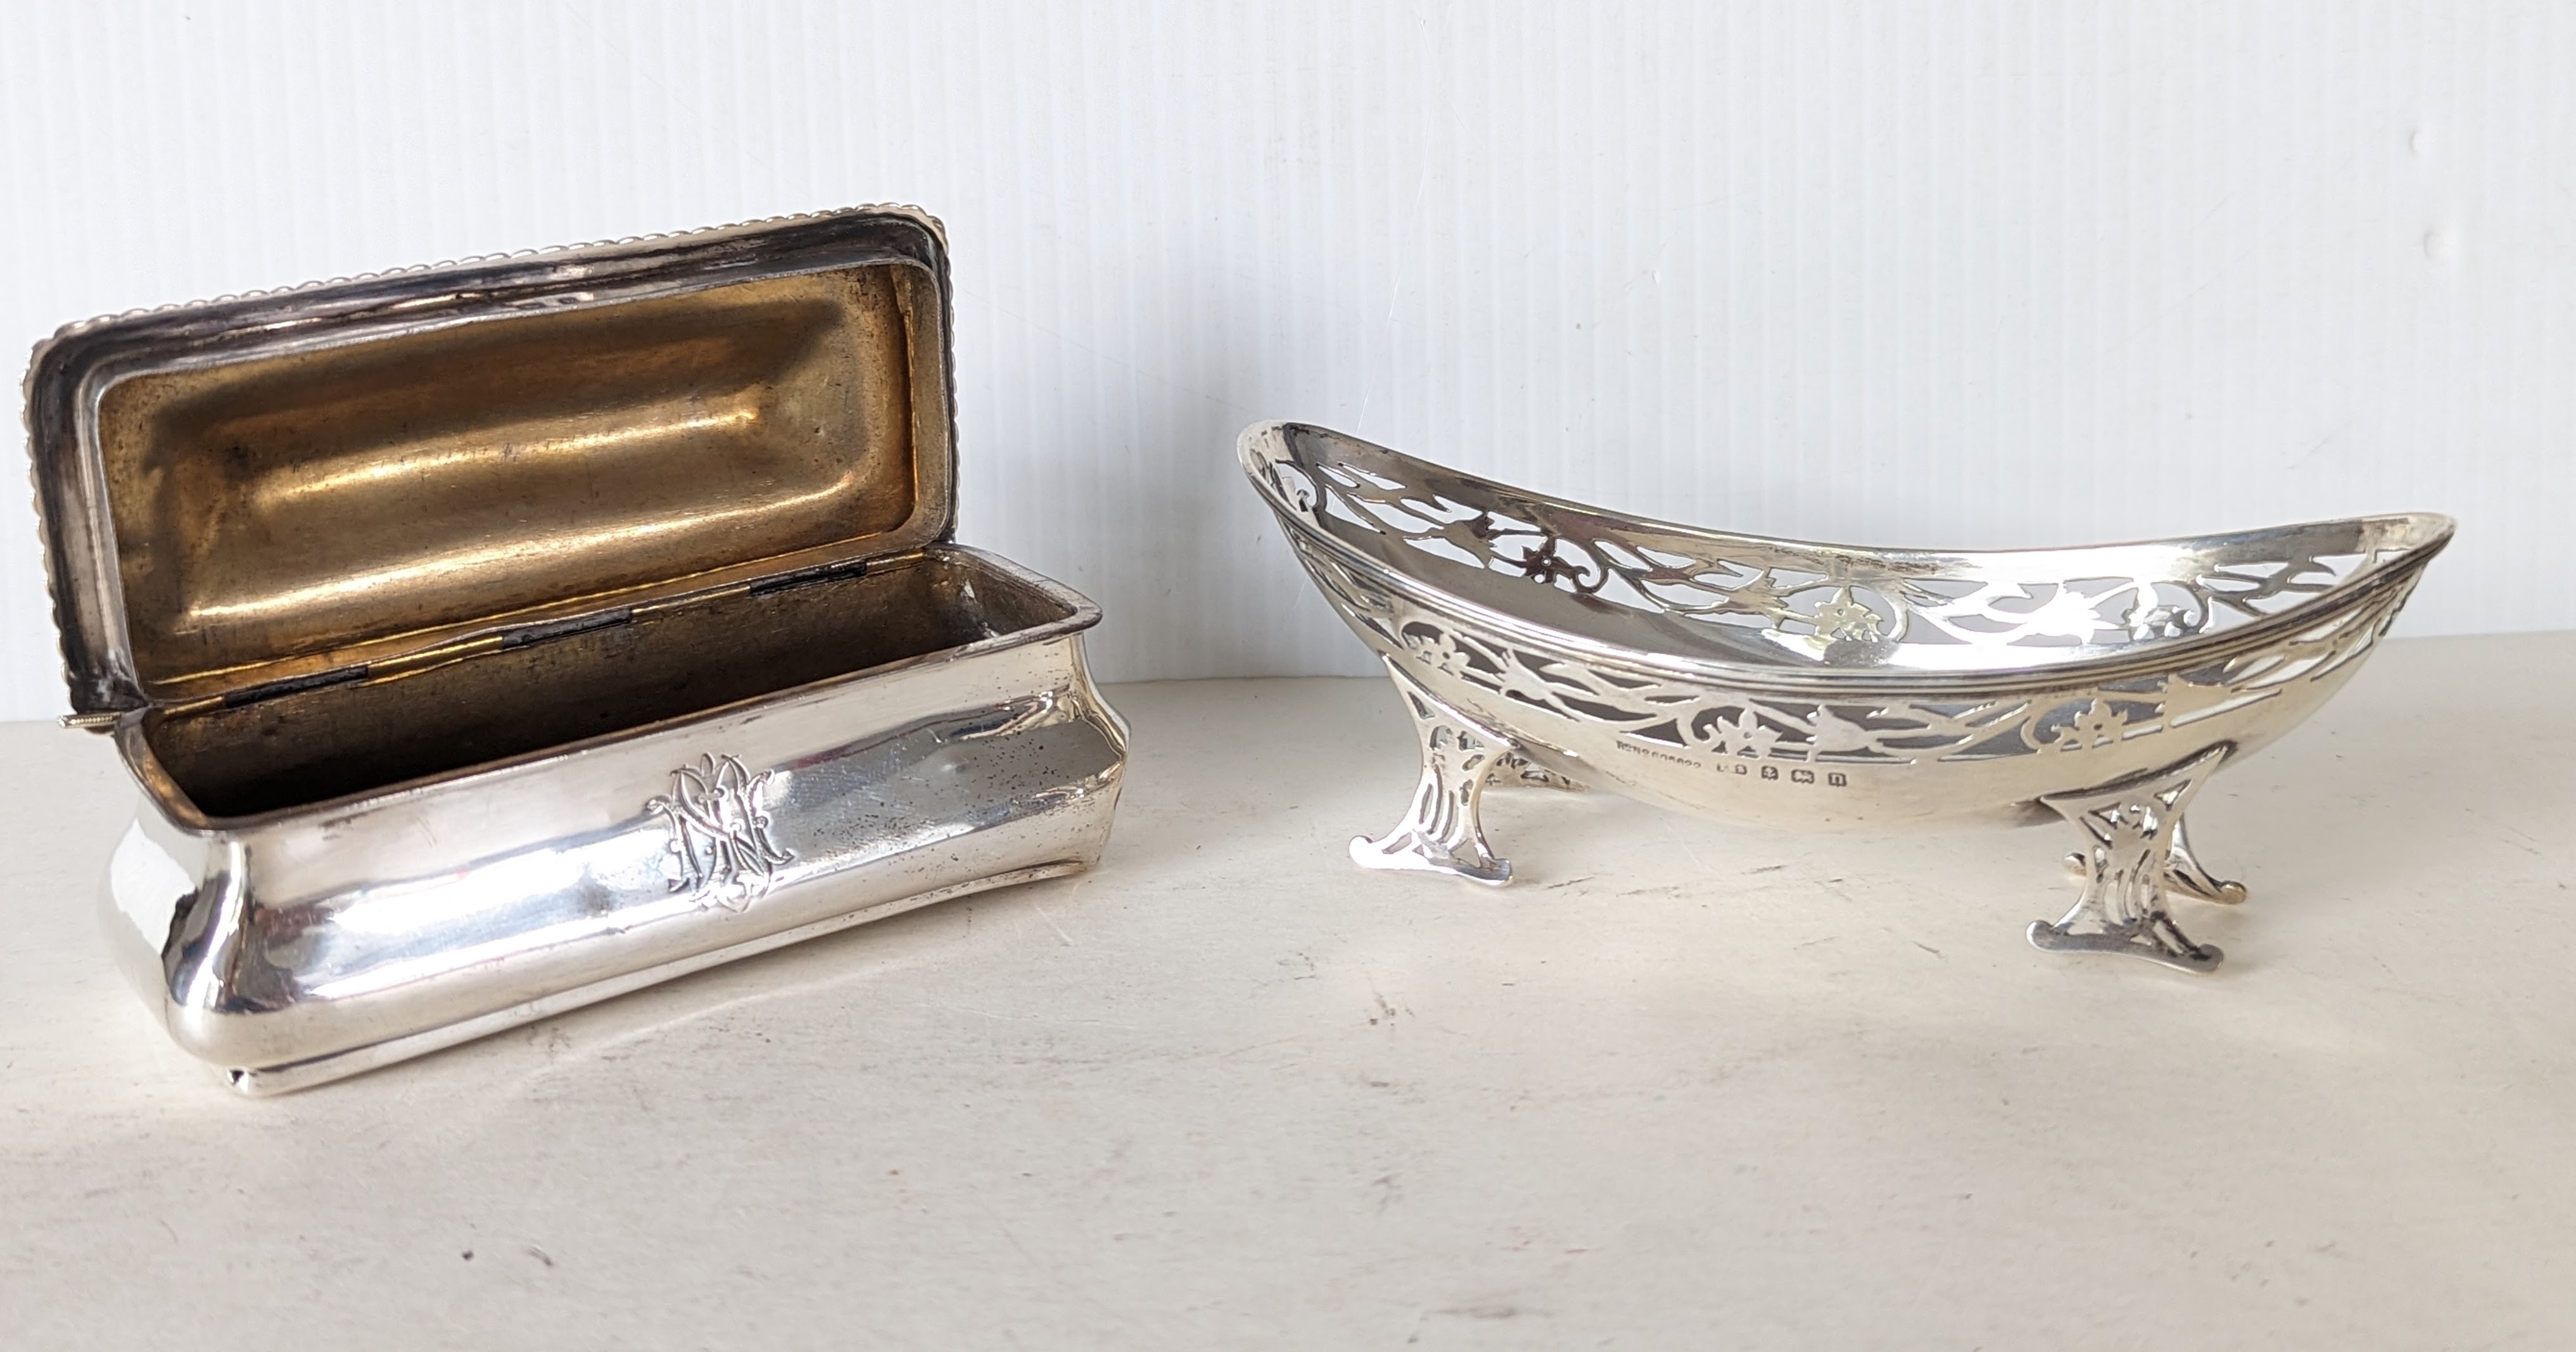 A late Victorian silver oblong trinket box with gadroon rim, 11 cm W, hallmarked for Mitchell Bosley - Image 2 of 2